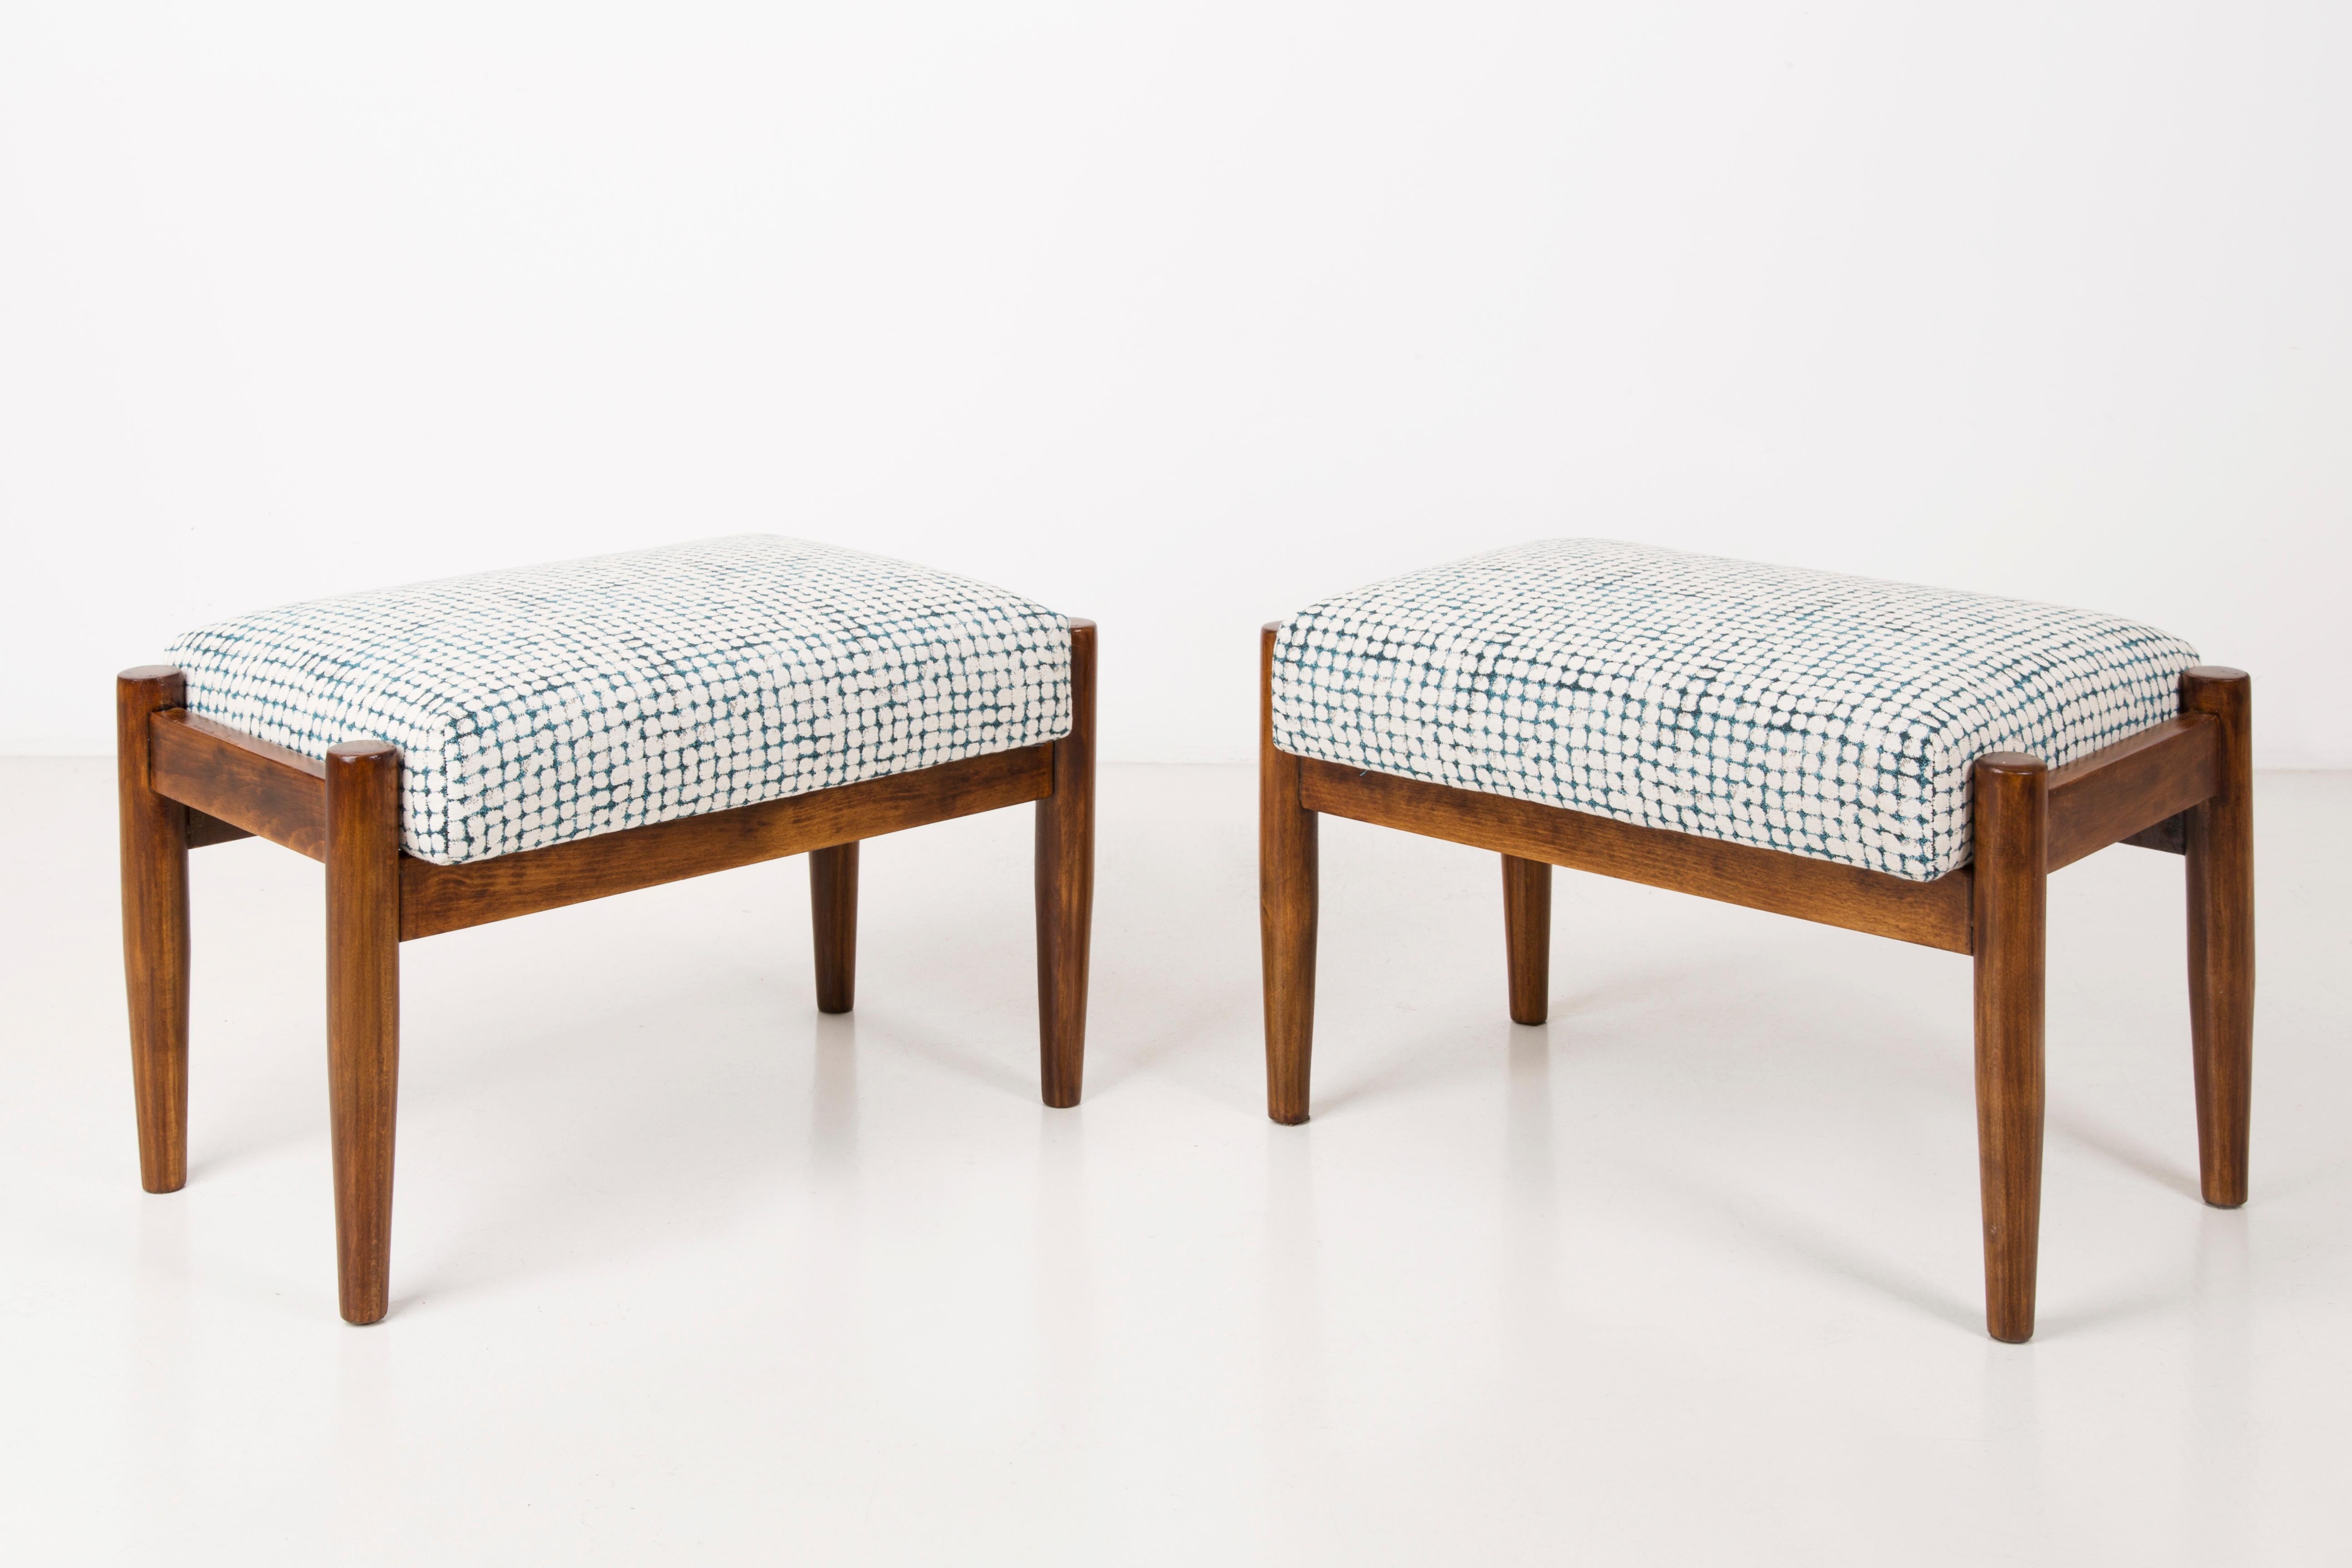 Set of White and Aqua Vintage Armchairs and Stools, Edmund Homa, 1960s For Sale 2